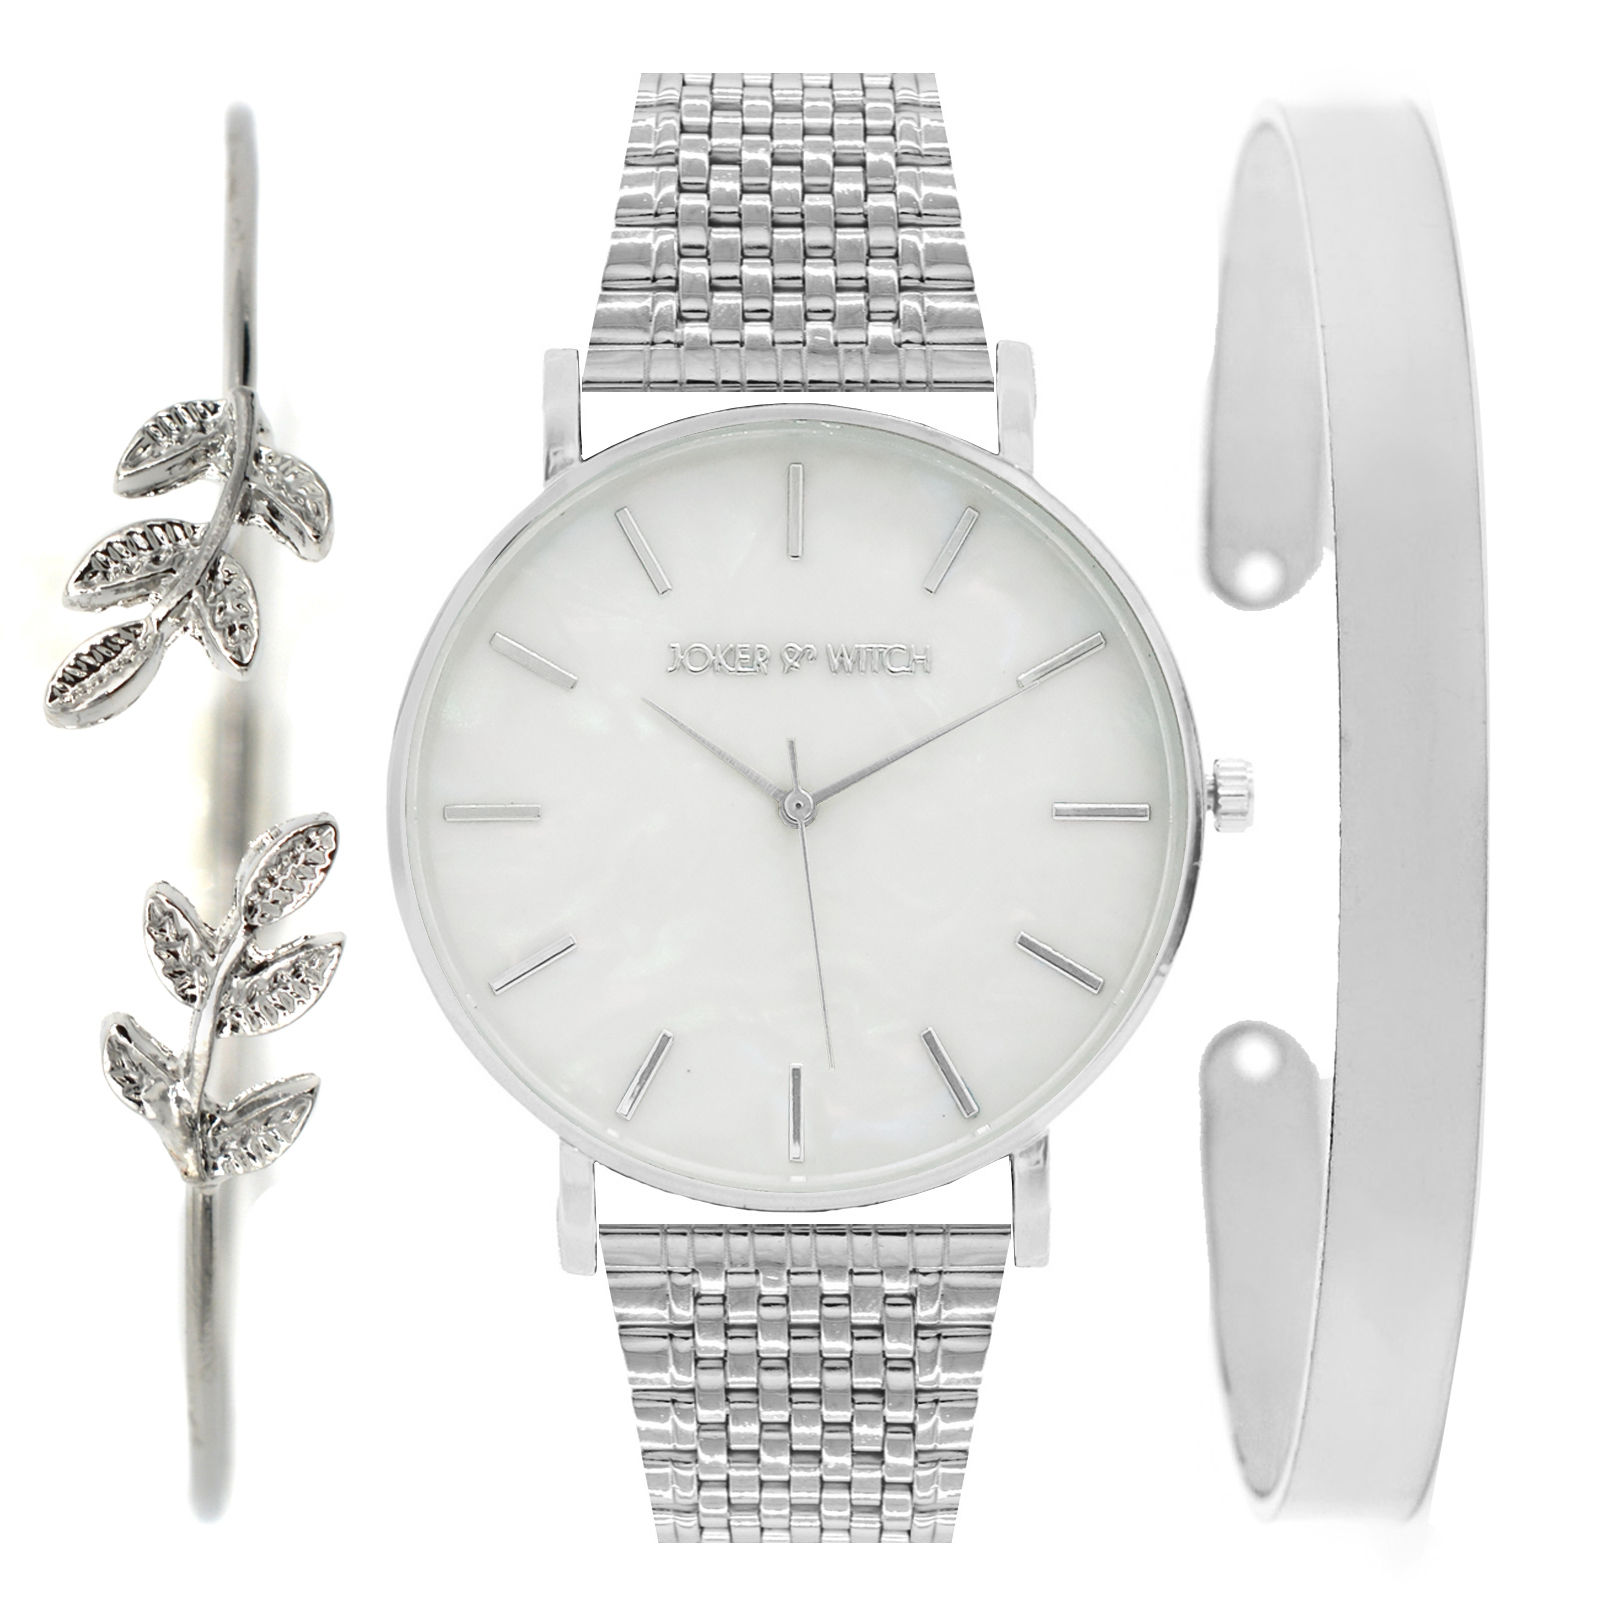 Joker  Witch Babe Silver Watch Bracelet Stack For Women Buy Joker  Witch  Babe Silver Watch Bracelet Stack For Women Online at Best Price in India   Nykaa